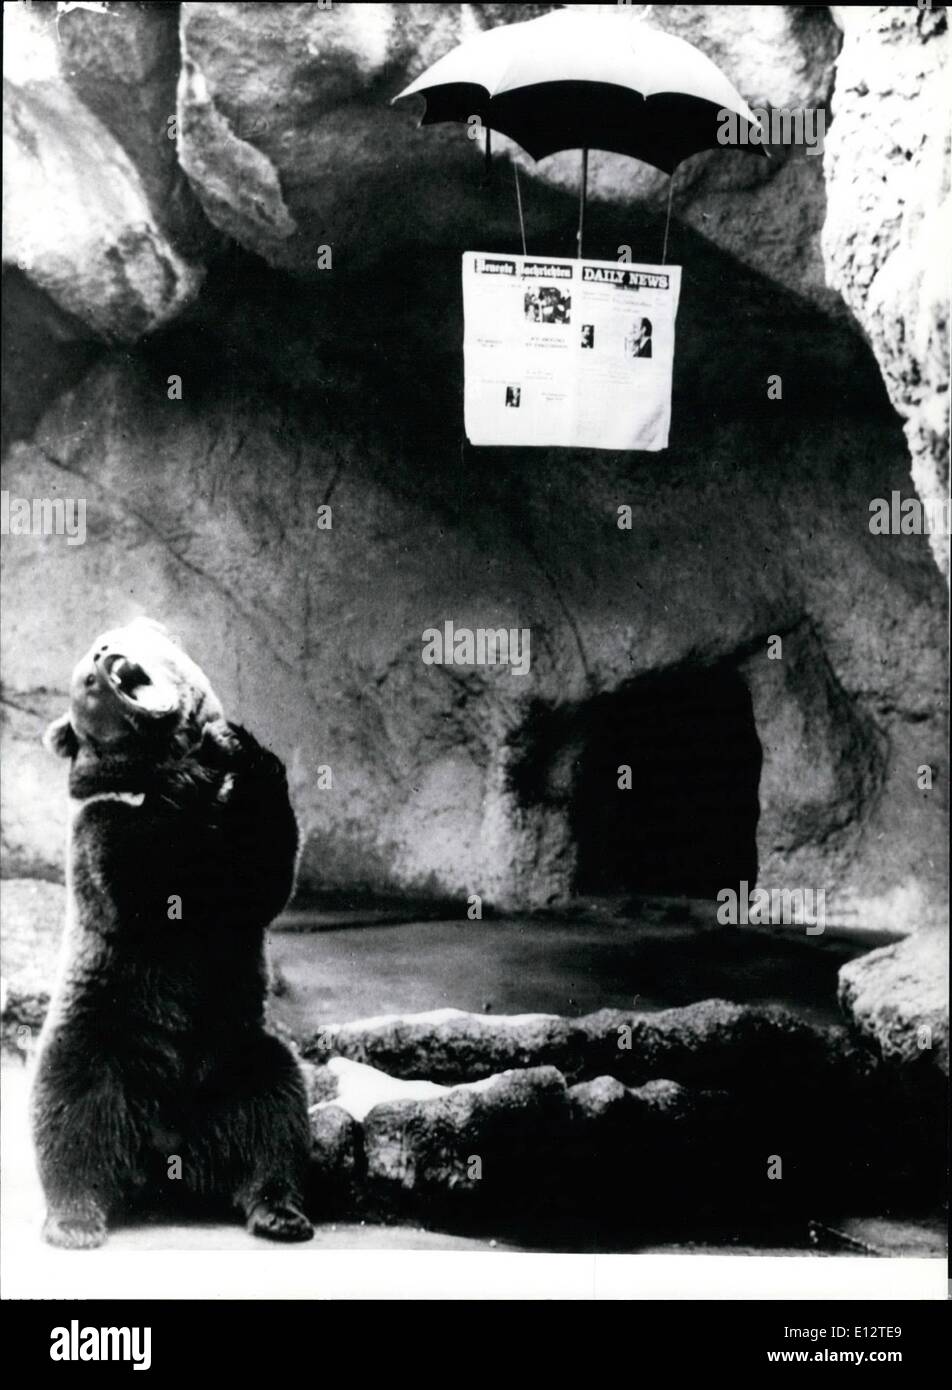 Feb. 25, 2012 - Rain Again: He has enough of it, this bear at the zoo of Budapest (Hungary). According to his mimics the weather report in the paper, which is being lowered into his territory, when it says: Rain again? Stock Photo